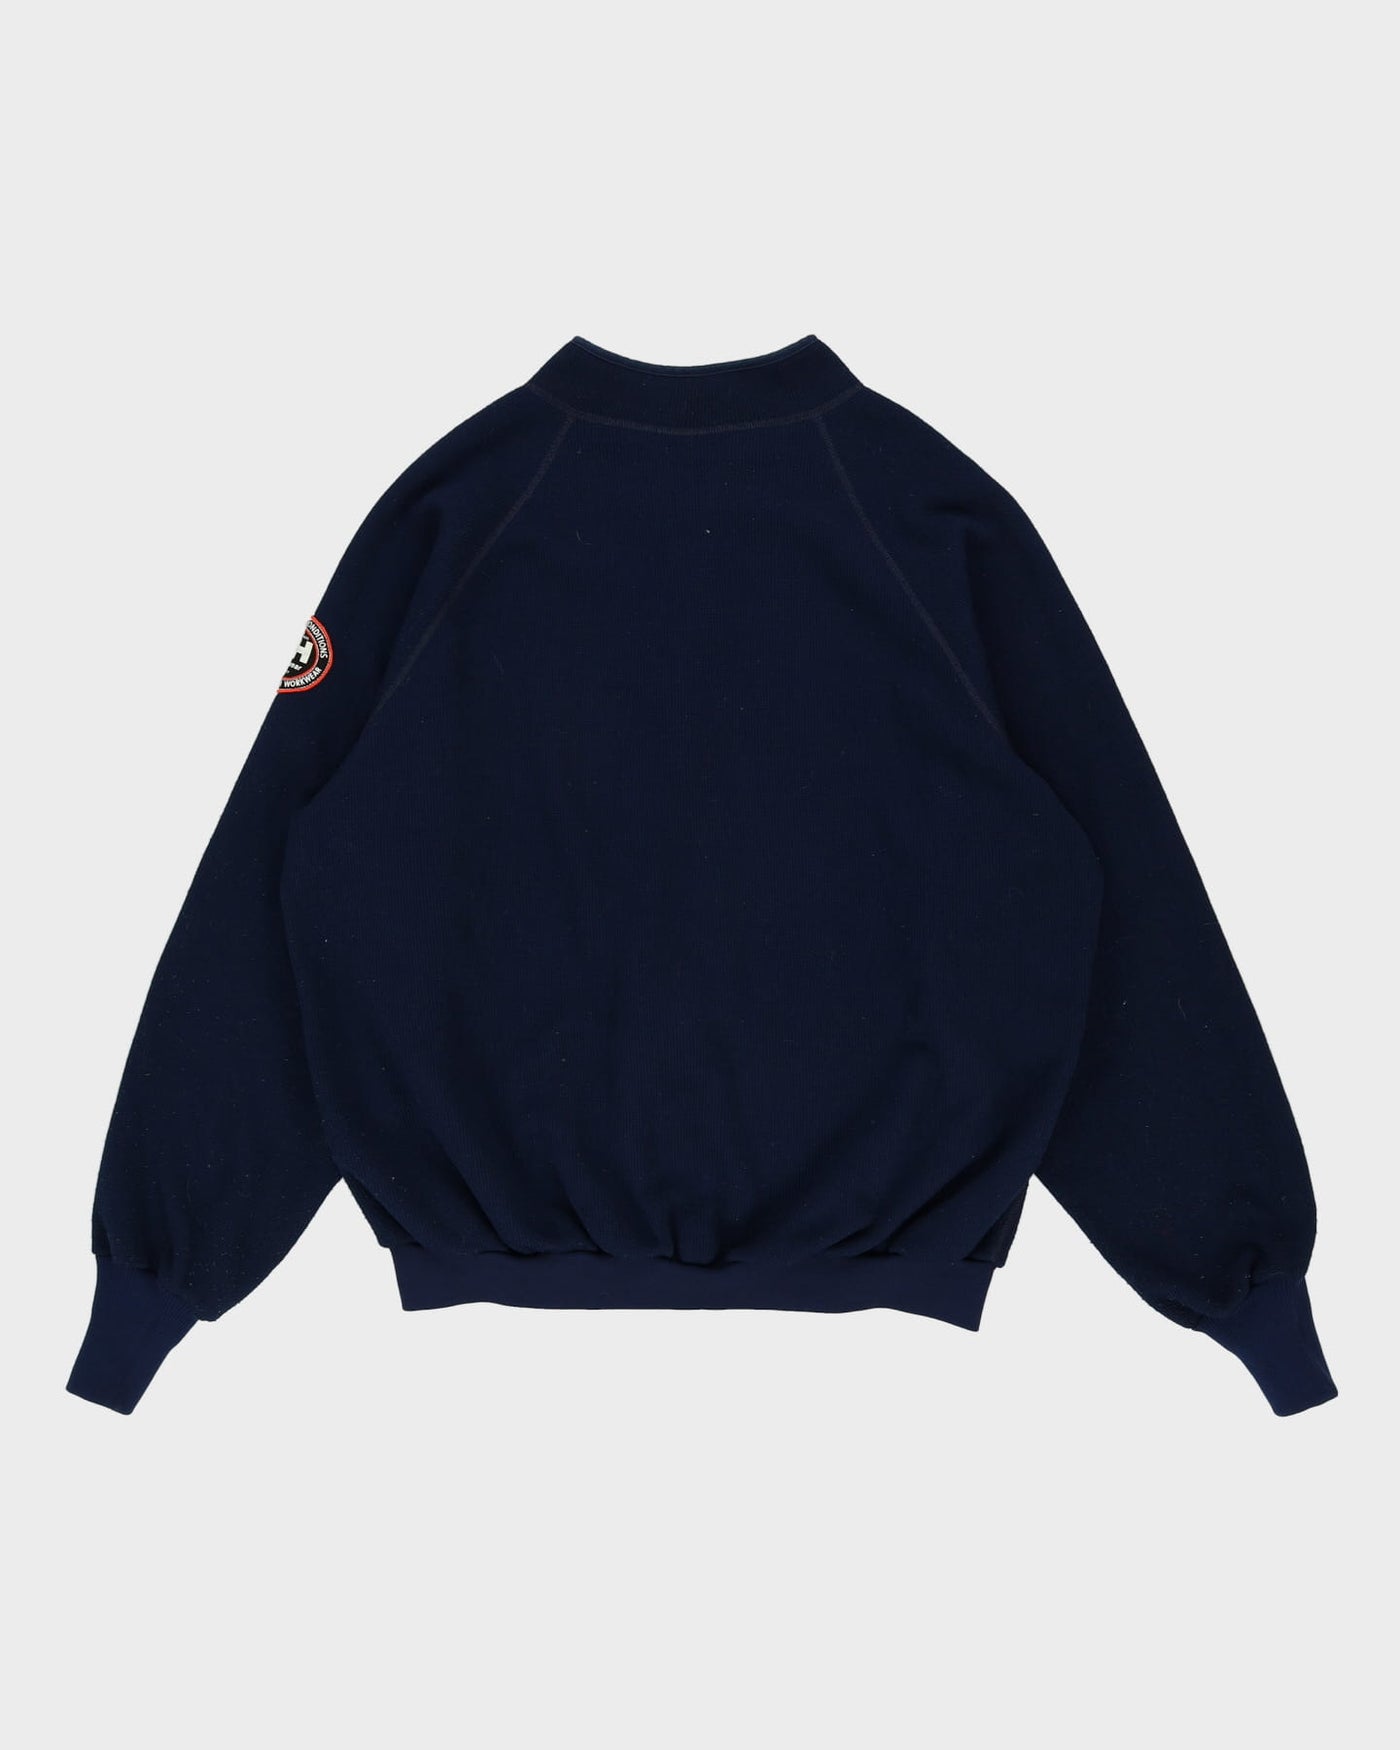 00s Helly Hansen Extreme Condition Navy Zip-Up Knit - XL